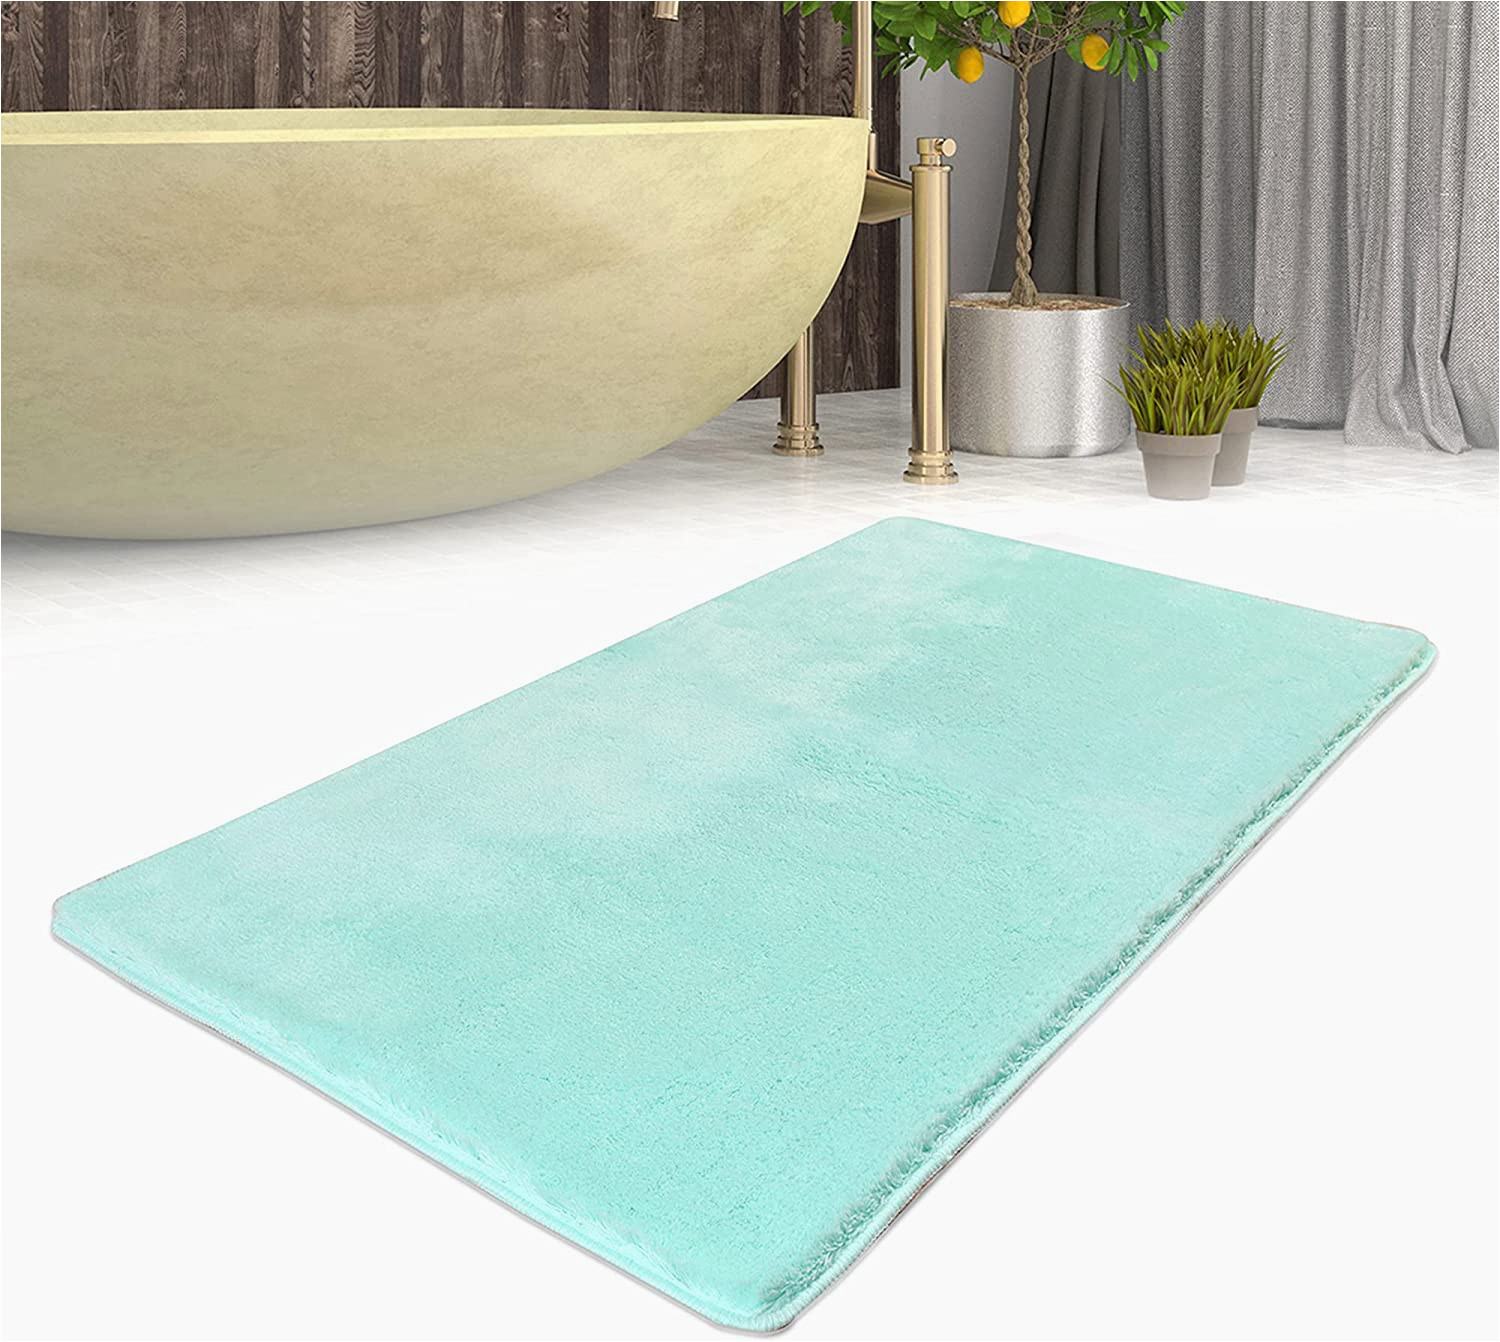 Blue Green Bathroom Rugs Meral Home Bathroom Rug Turquoise Mint Large 80 X 150 Cm soft Non …